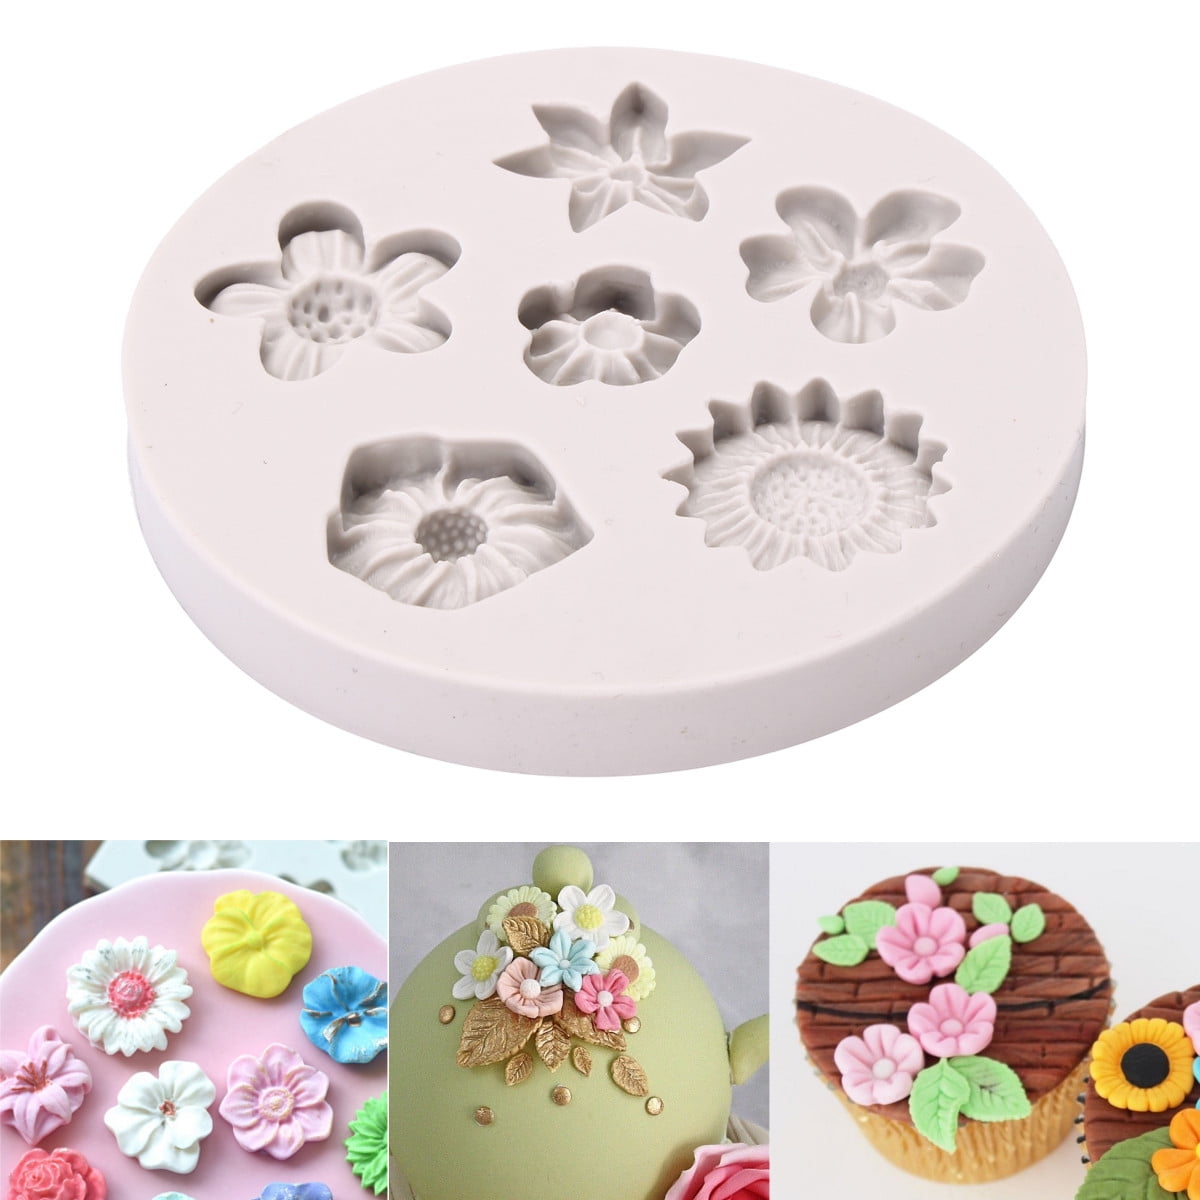 Cake Silicone Icing Mould for Cake and Cupcake Decoration by FPC Tudor Rose